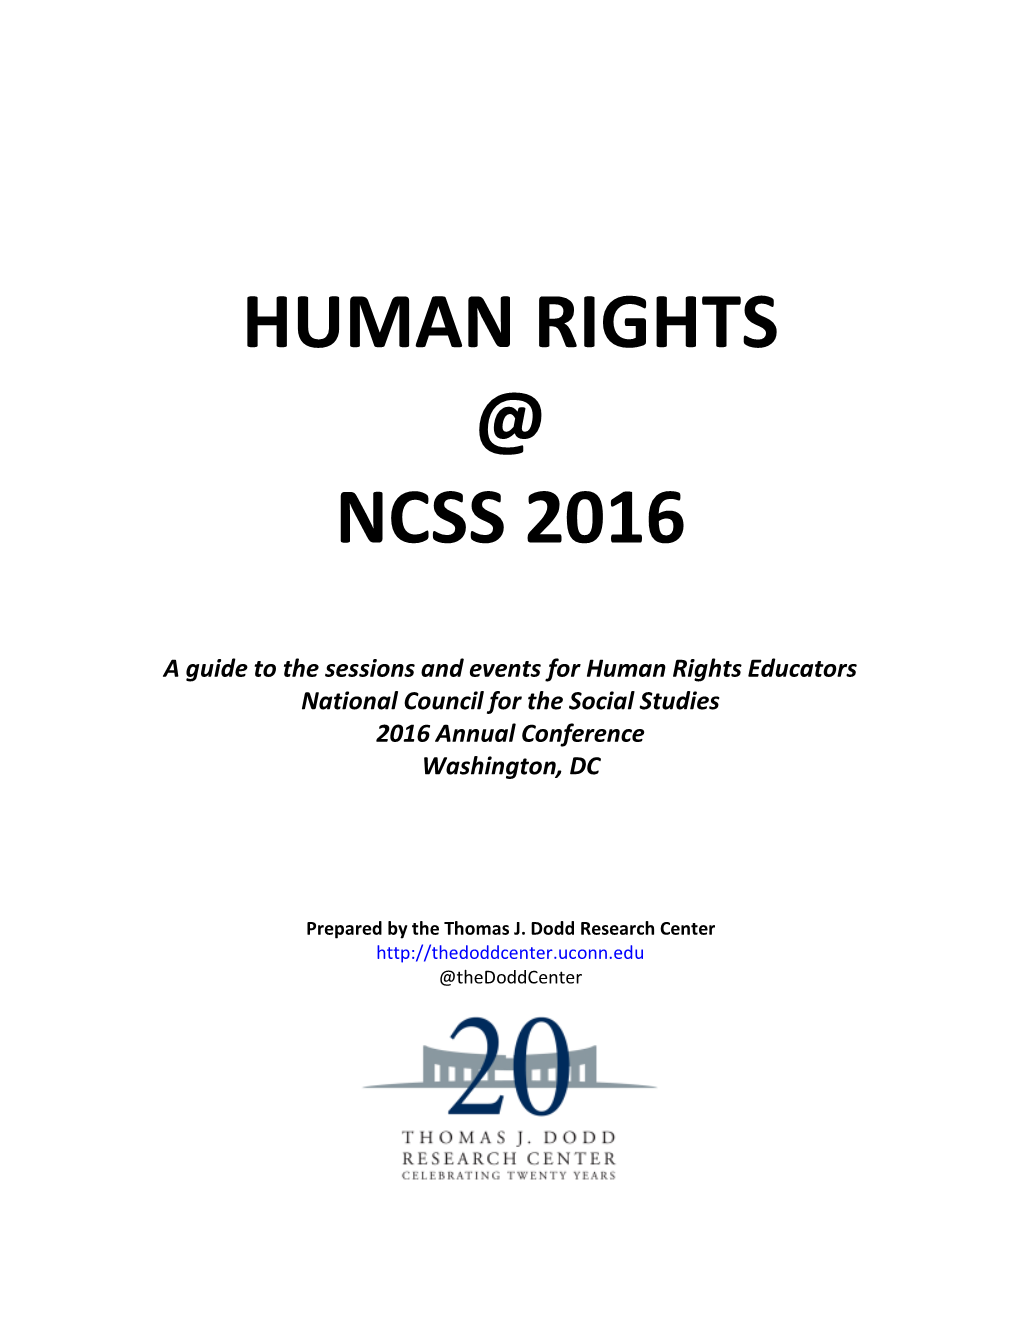 Human Rights @ Ncss 2016